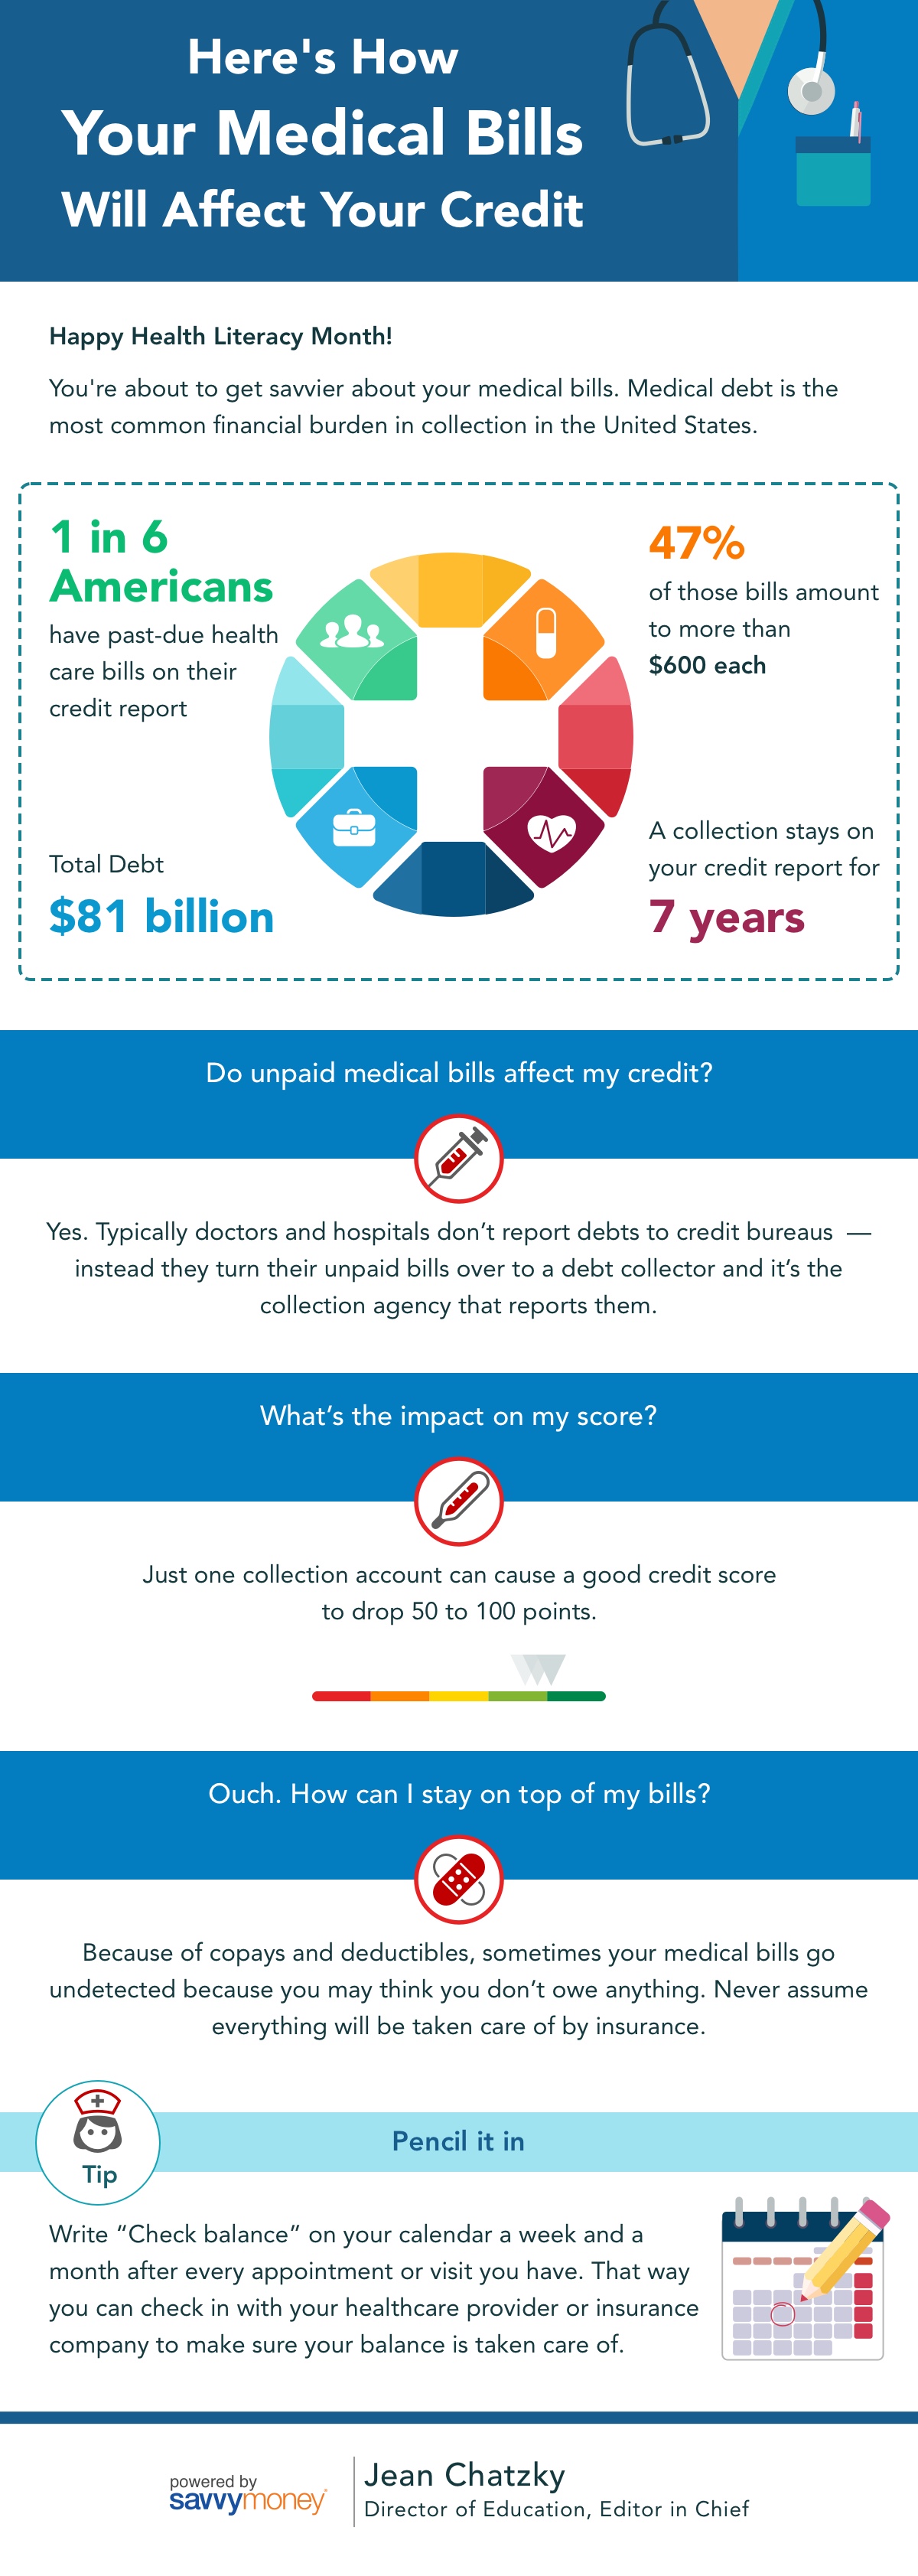 Here's How Your Medical Bills Will Affect Your Credit Score infographic image